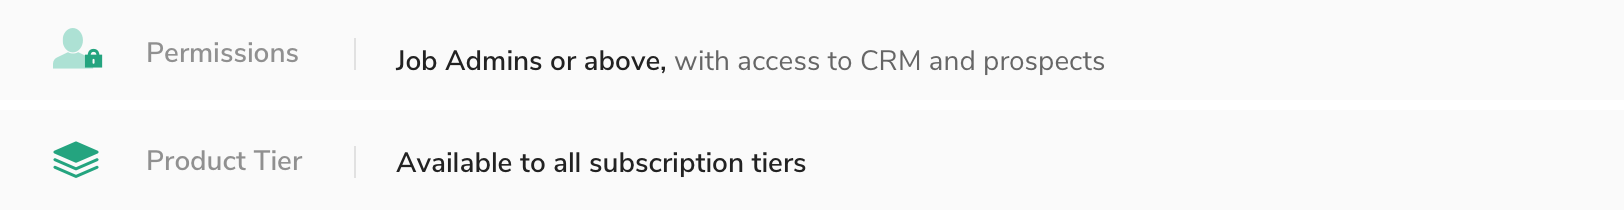 CRM_-_Job_Admin_-_Includes_Prospects_-_All_Tiers.png